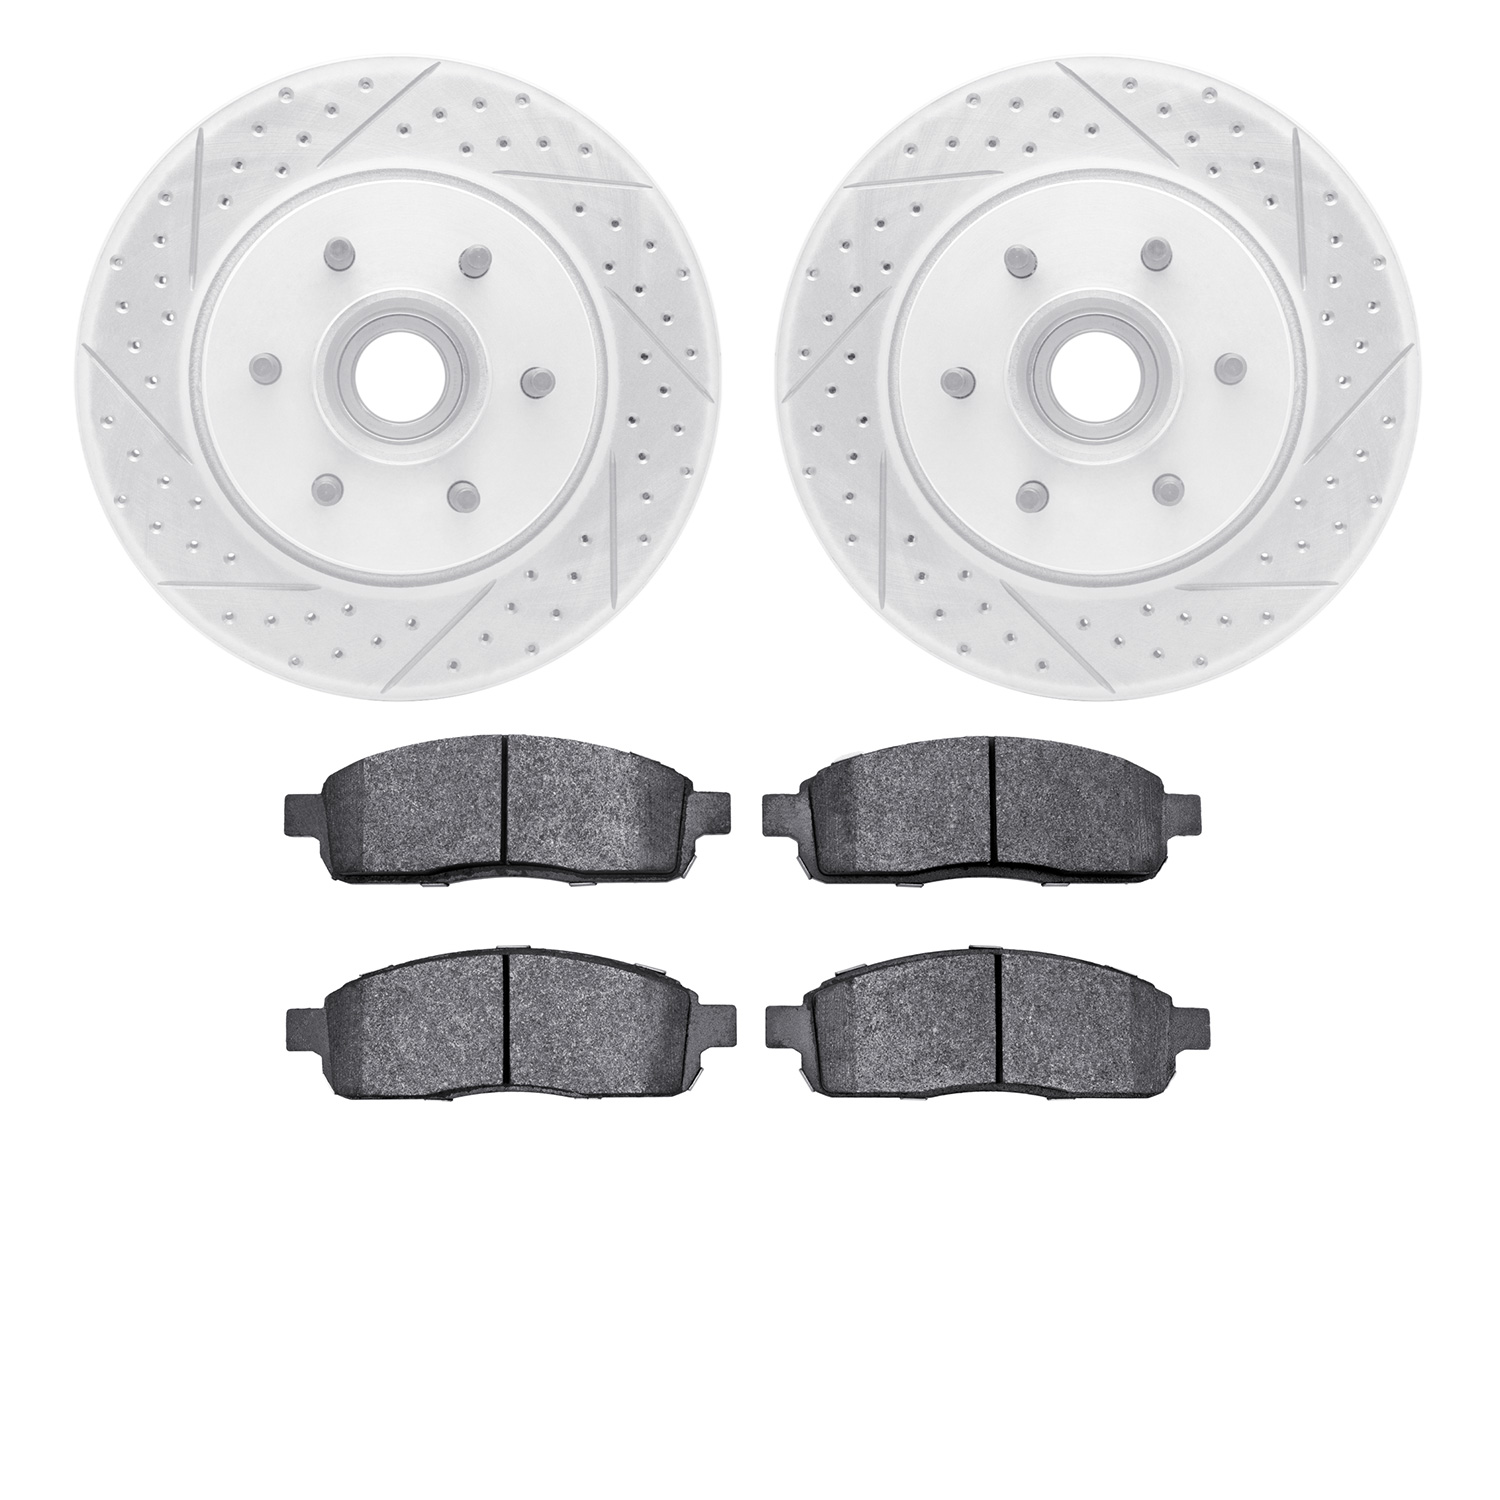 2202-99133 Geoperformance Drilled/Slotted Rotors w/Heavy-Duty Pads Kit, 2004-2008 Ford/Lincoln/Mercury/Mazda, Position: Front